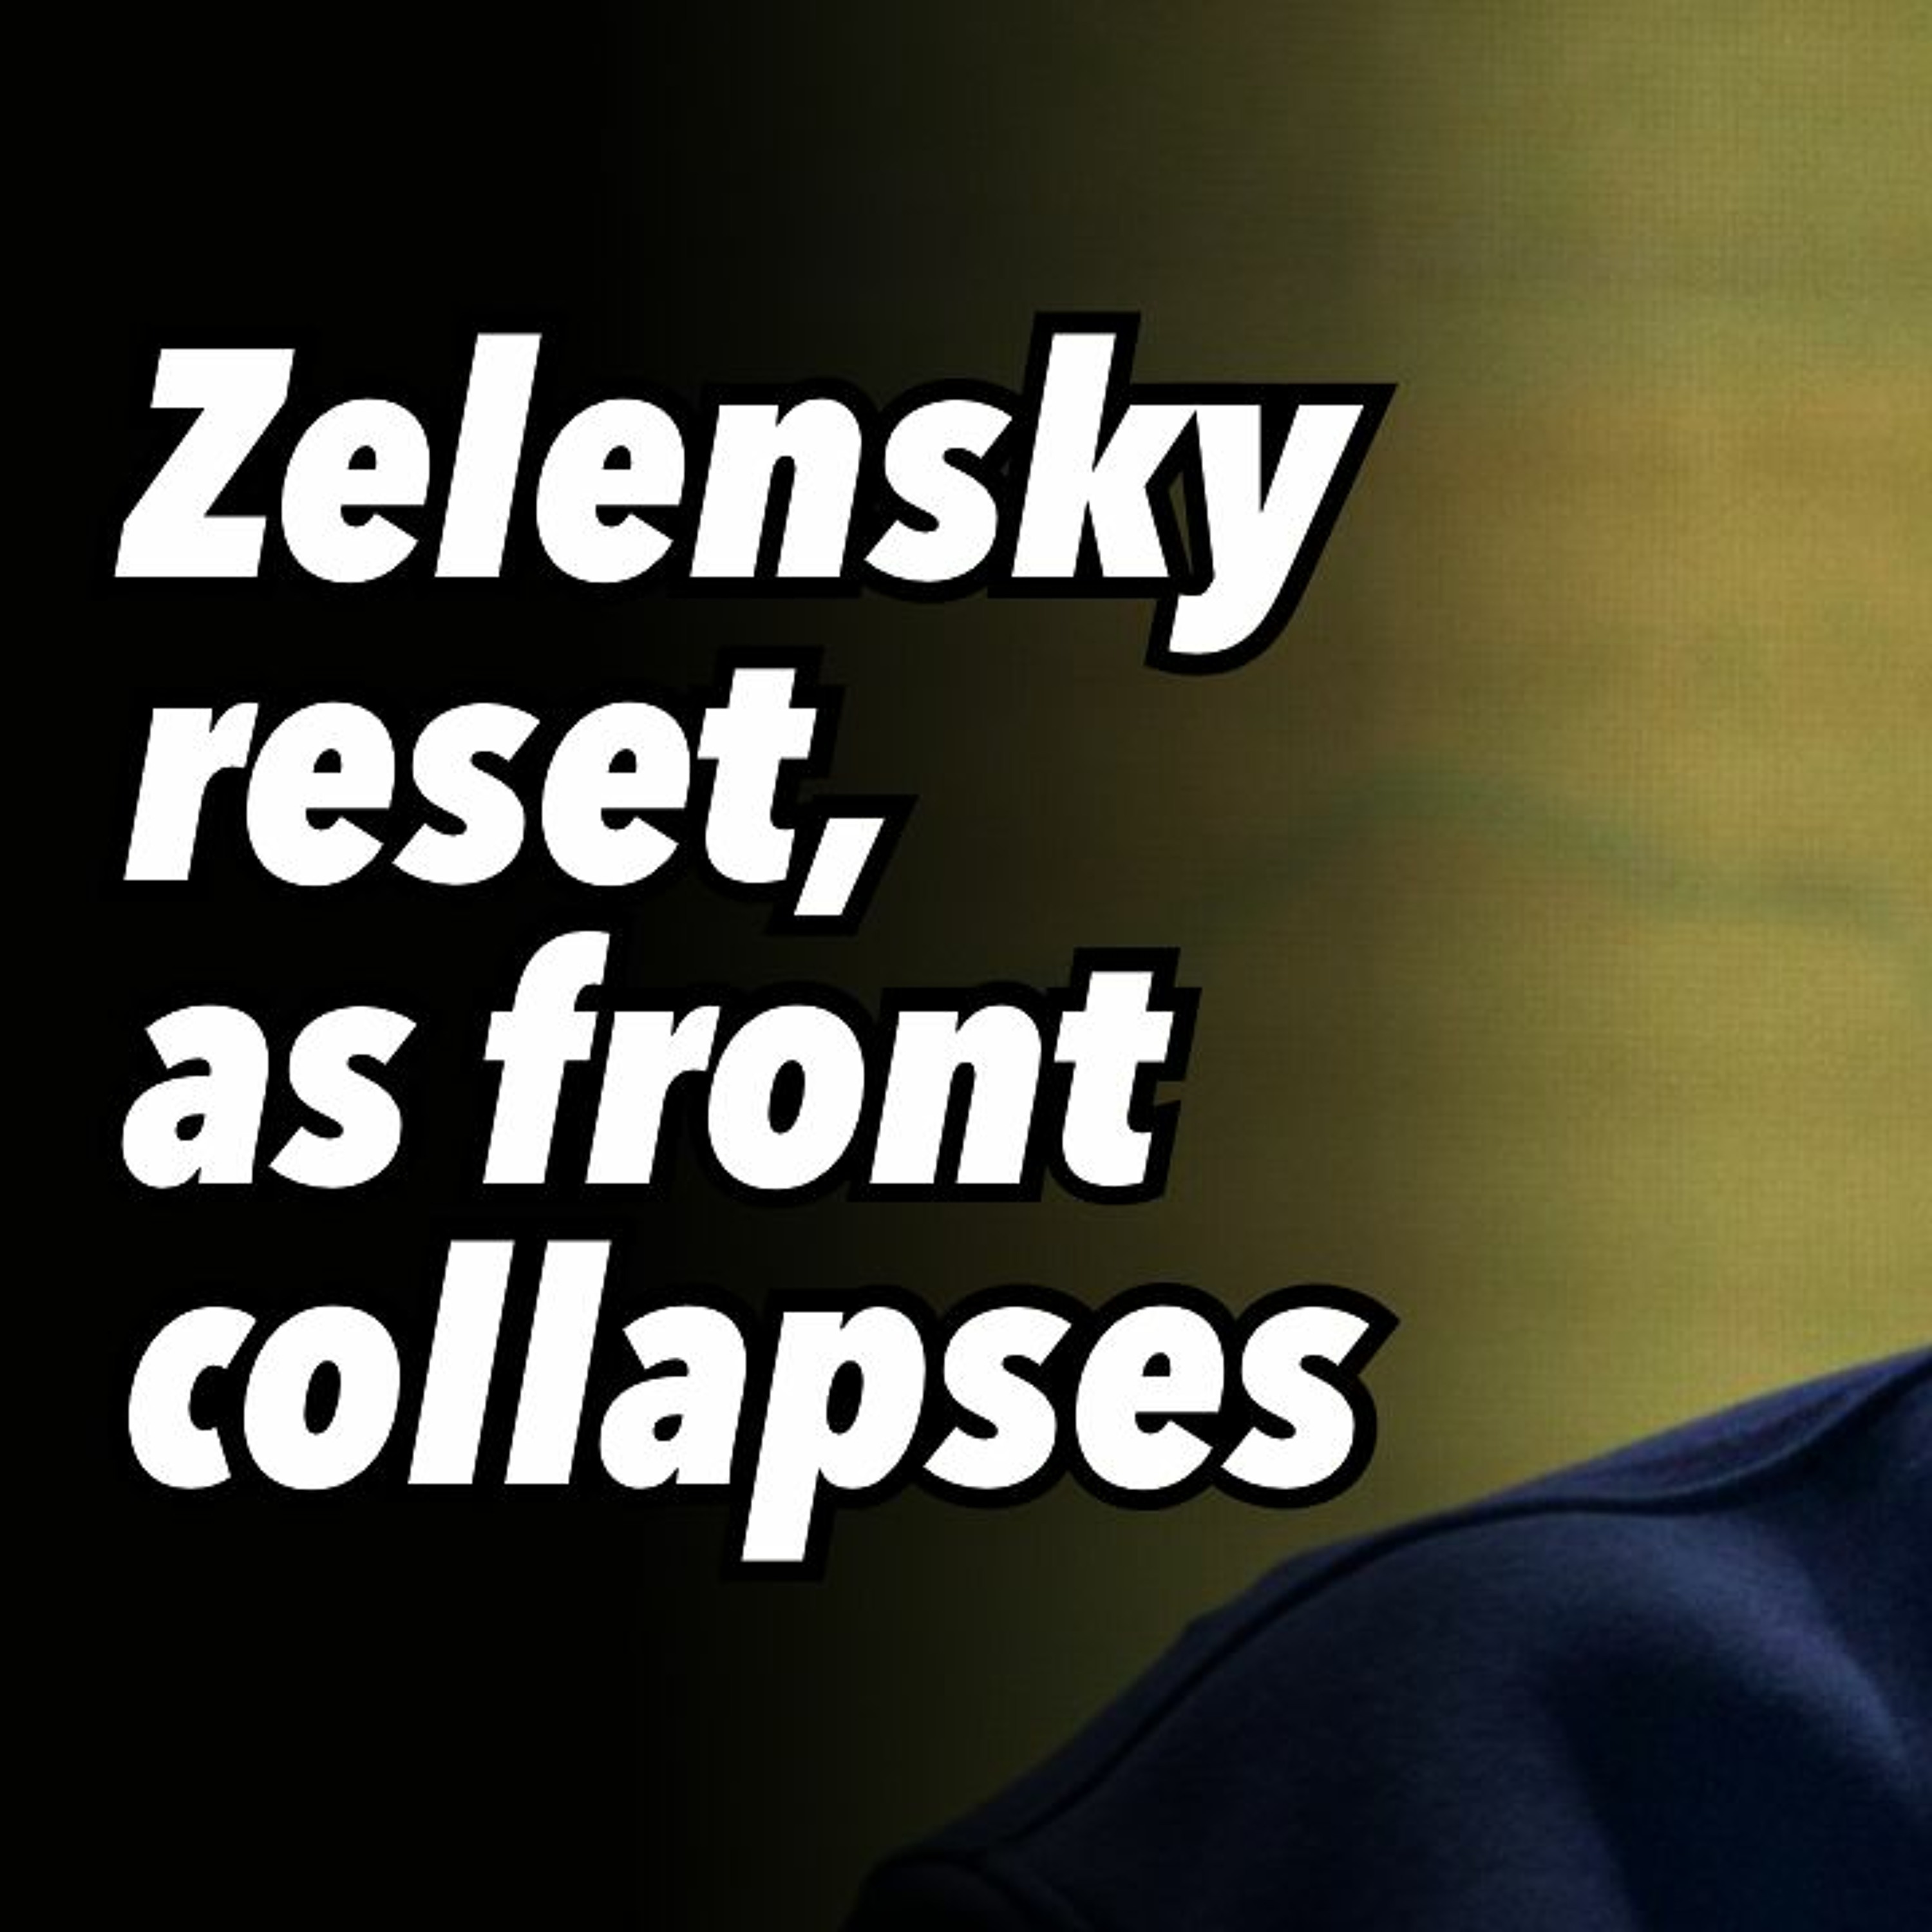 Zelensky reset, as front collapses